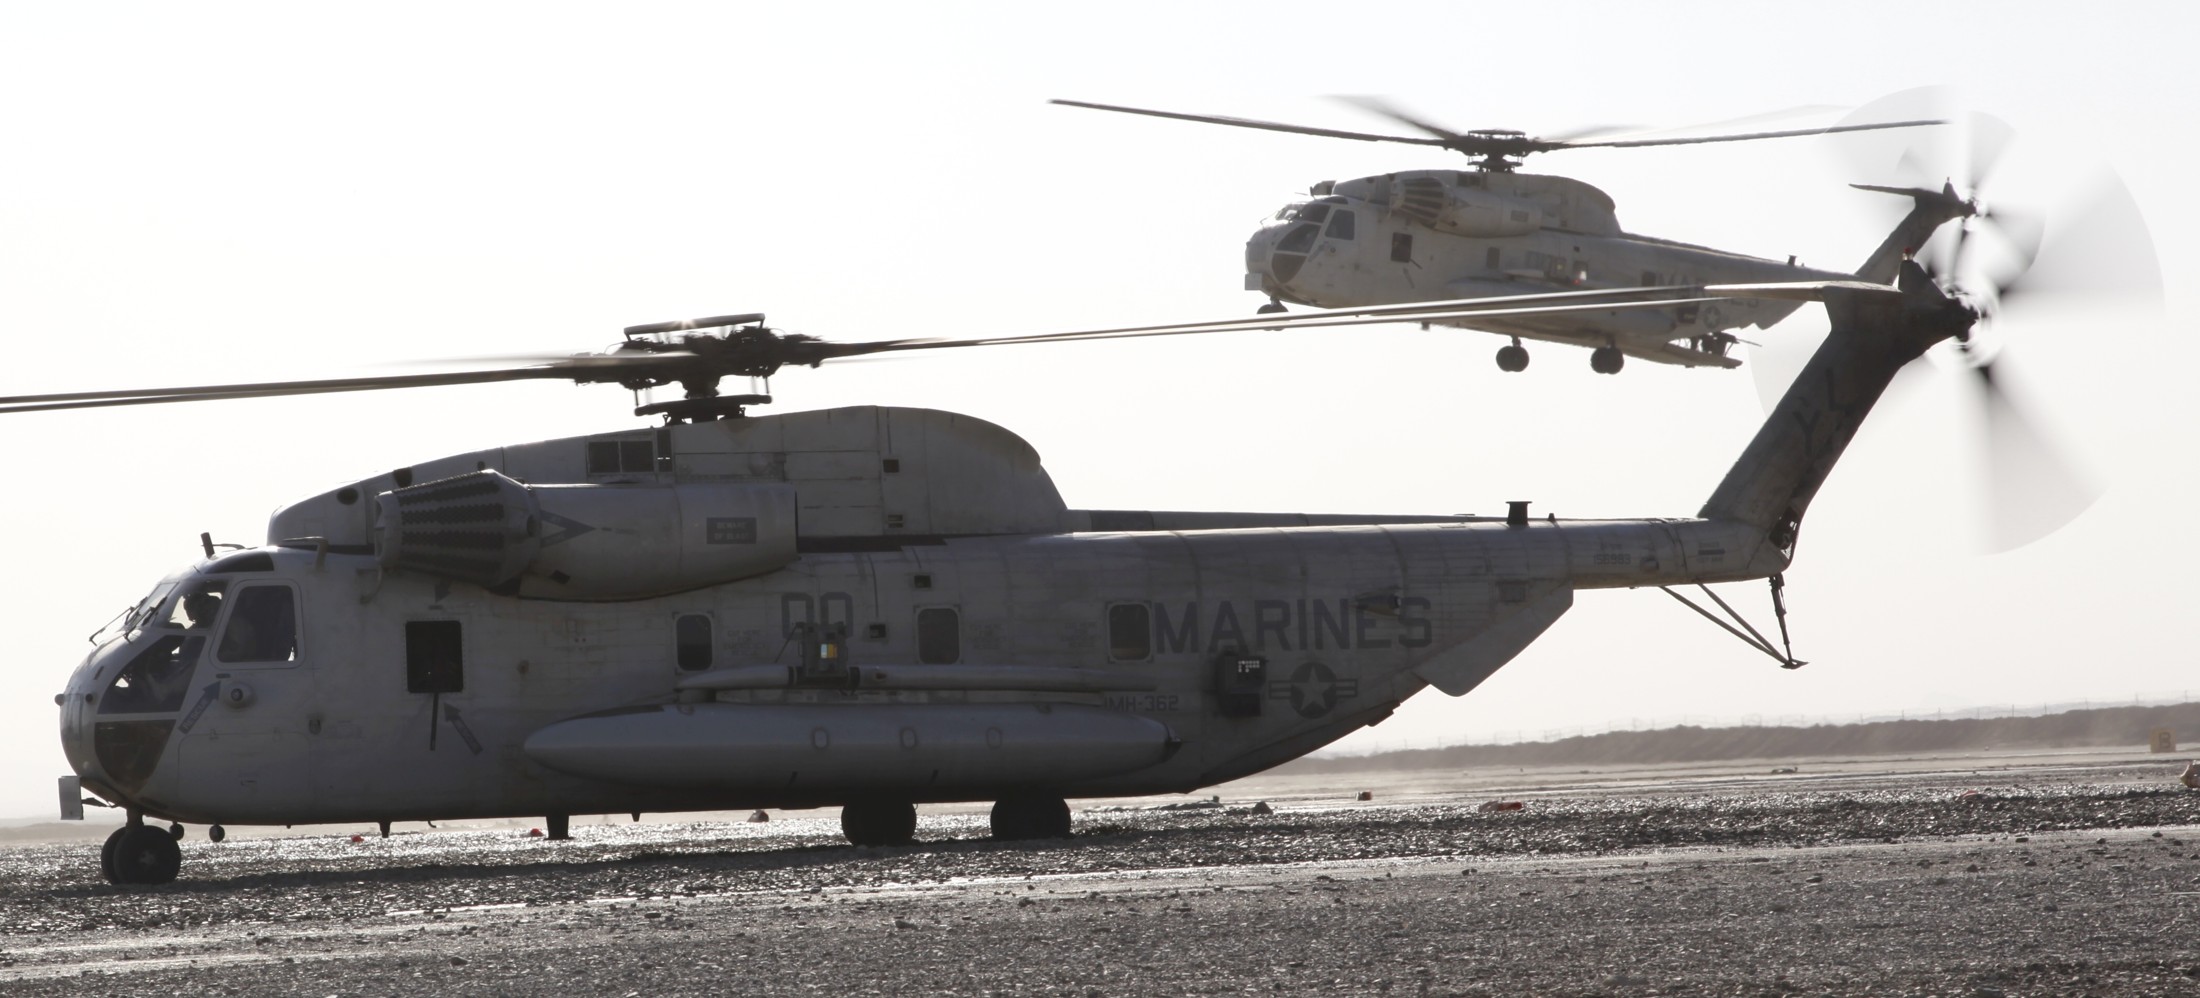 hmh-362 ugly angels marine heavy helicopter squadron usmc sikorsky ch-53d sea stallion 16 delaram afghanistan